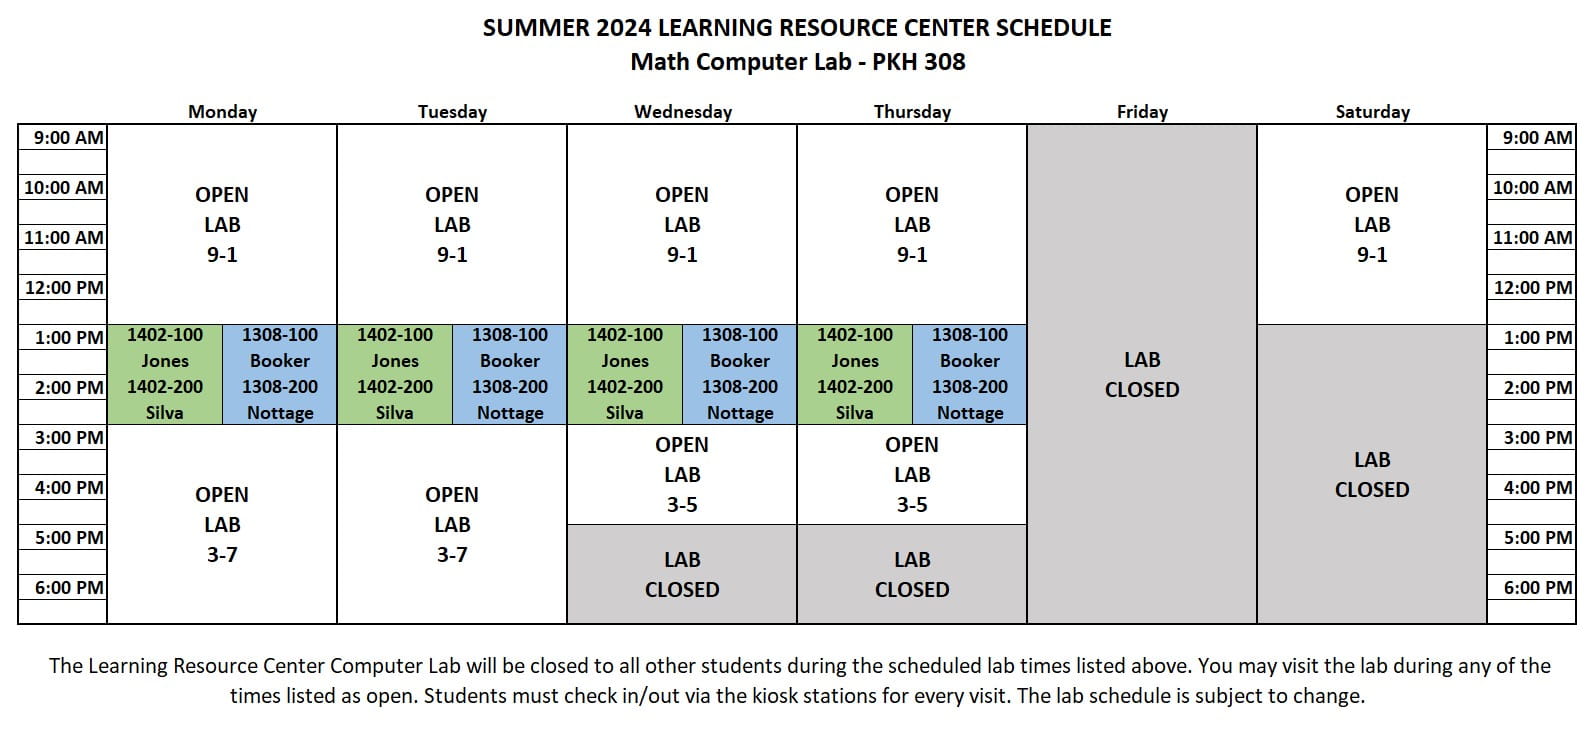 The Summer LRC Computer Lab Schedule. Open Monday and Tuesday 9 A M to 1 P M and 3 P M to 7 P M, Wednesday and Thursday 9 A M to 1 P M and 3 P M to 5 P M, and Saturday 9 A M to 1 P M.